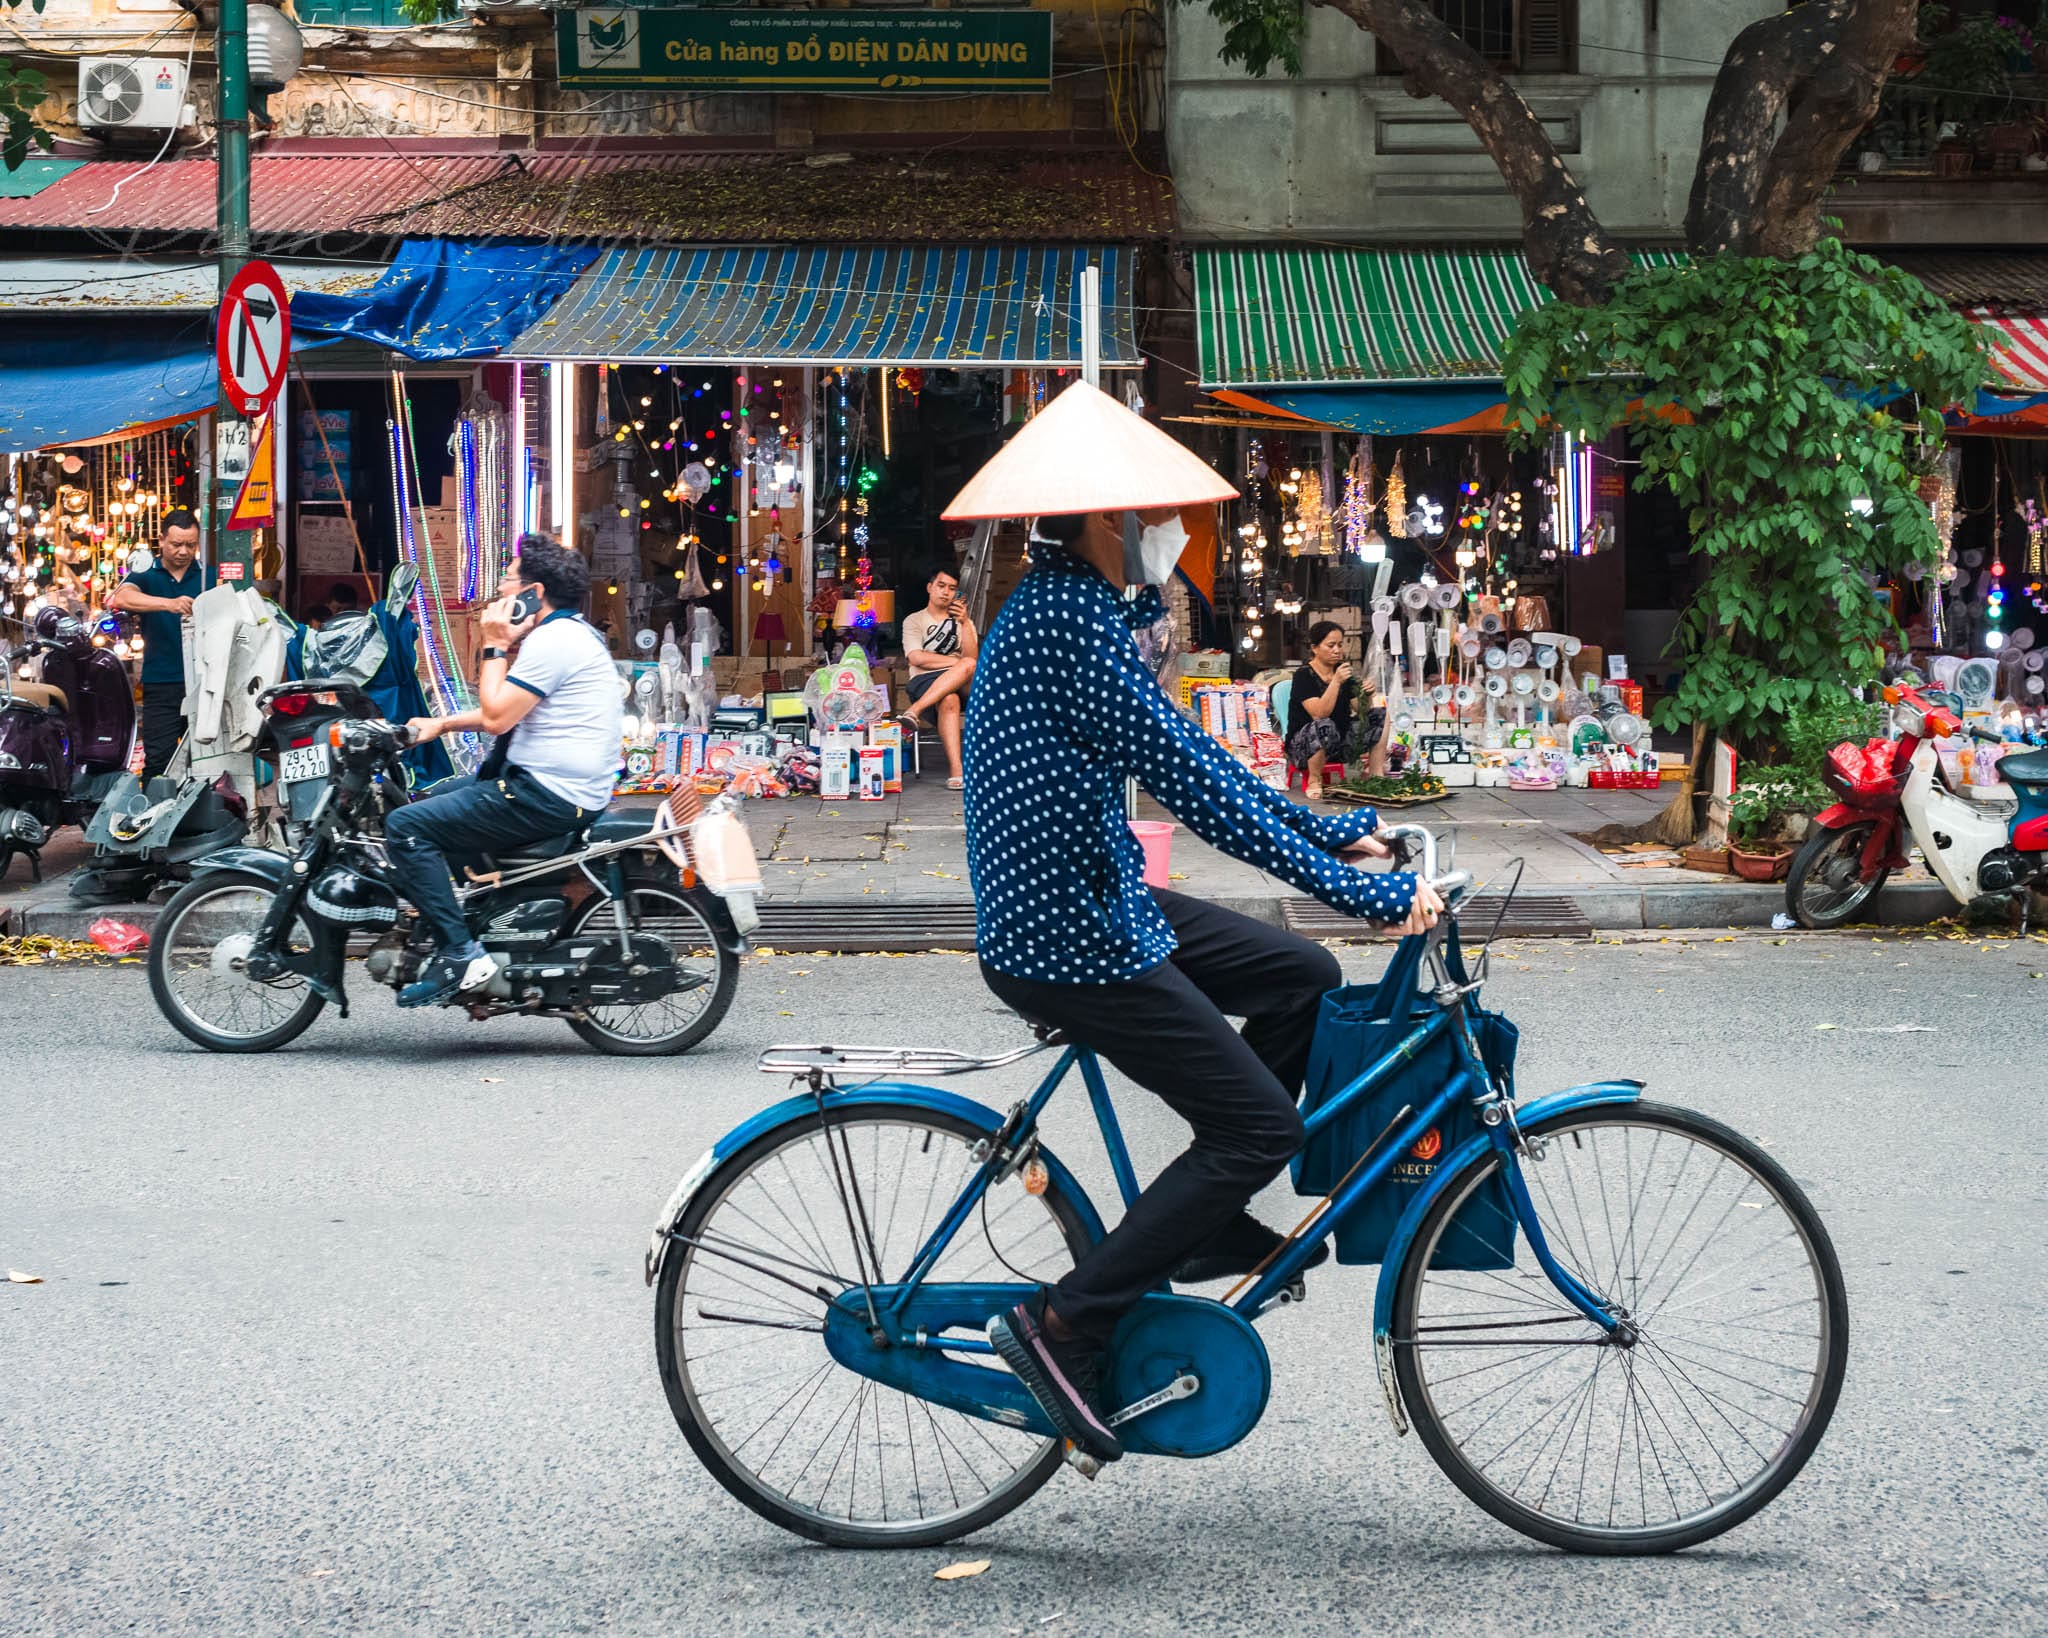 Cyclist riding on a bustling Hanoi city street with shops and motorcycles.